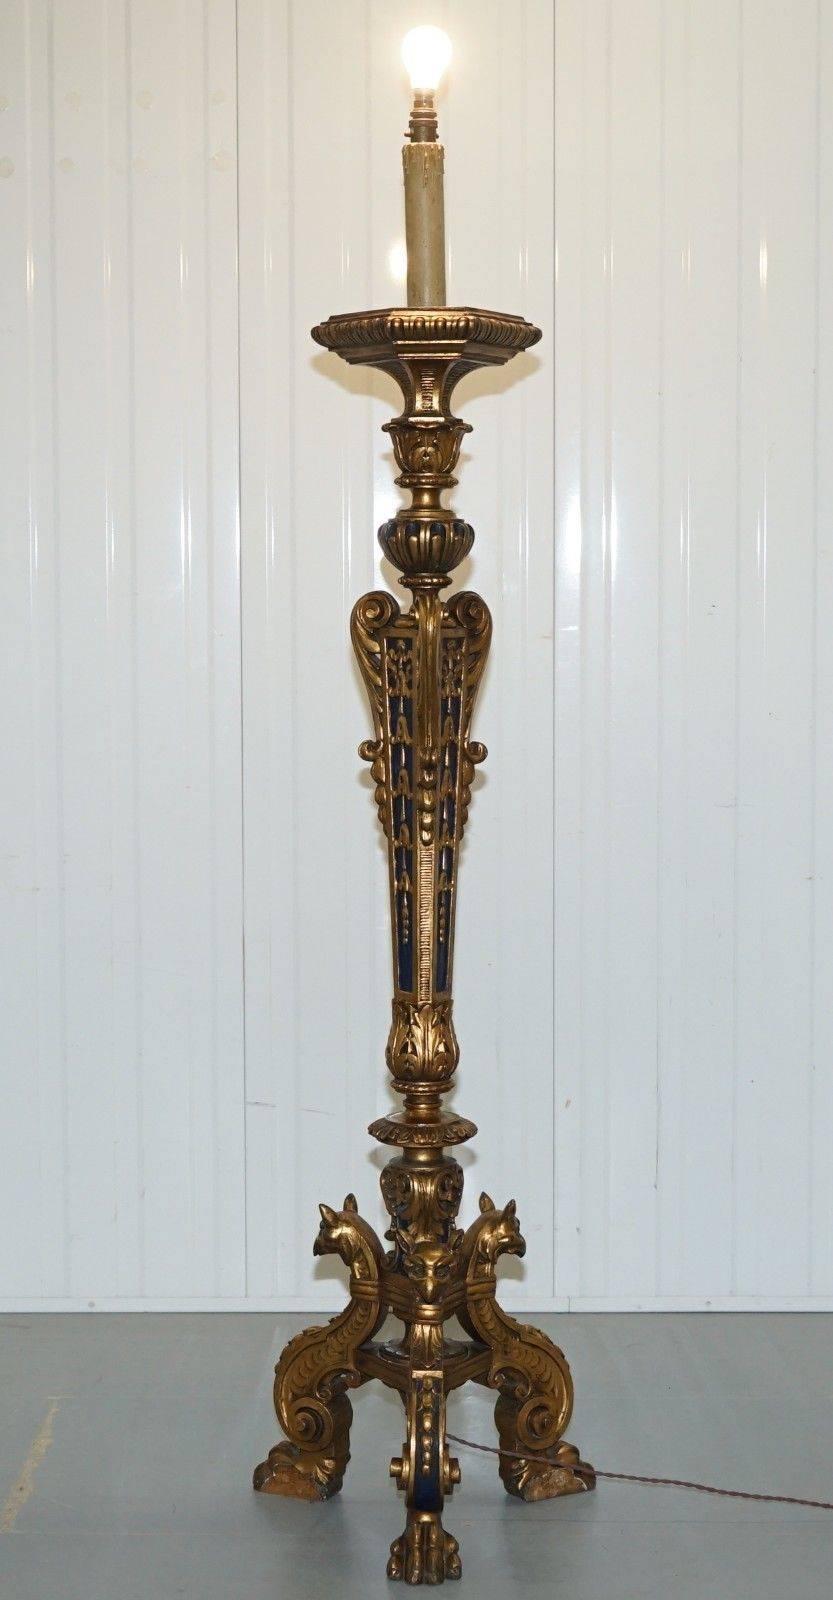 We are delighted to offer for sale this absolutely stunning French 19th century gilt wood carved column lamp with gold leaf and Napoleonic blue paint

The lamp is stunning, It has lion hairy paw feet and a hawk-like bird head on each leg, the